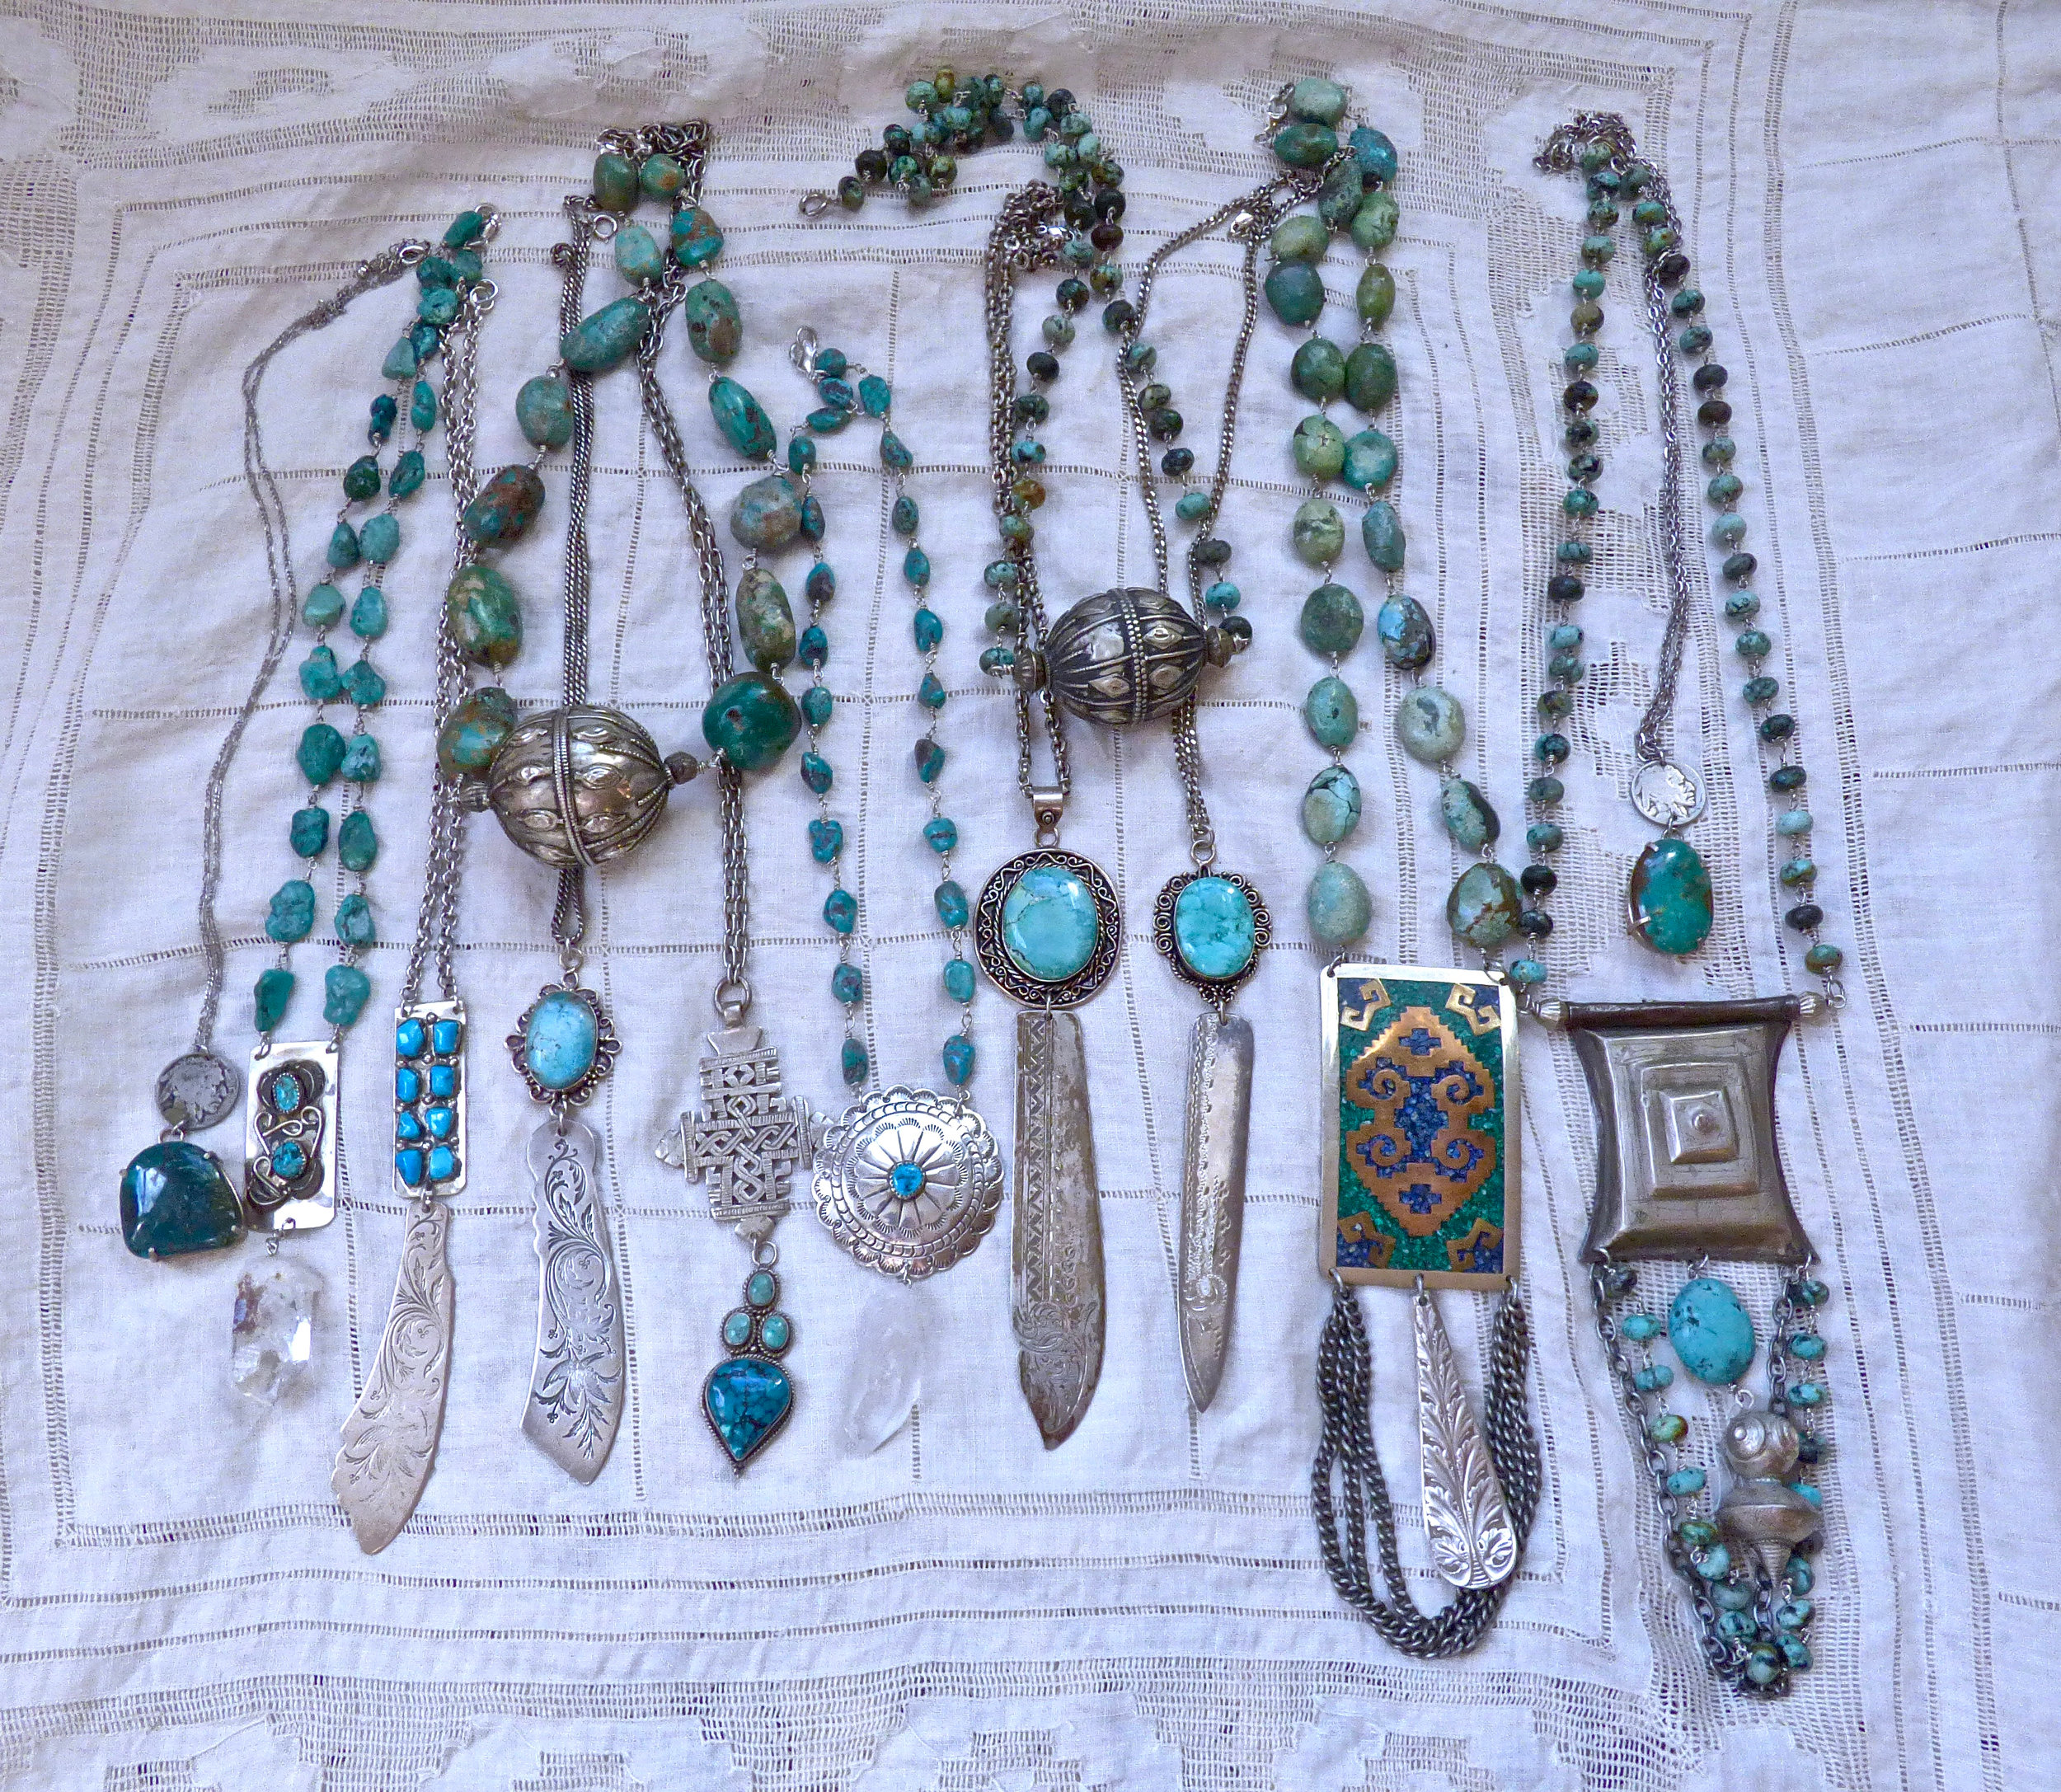  Necklaces of turquoise beads, hand set in wire, repurposed Navajo money clips and belt buckles, Edwardian engraved knives, Tuareg medallions, Bedouin and Yemenite beads, quartz and buffalo nickels. 